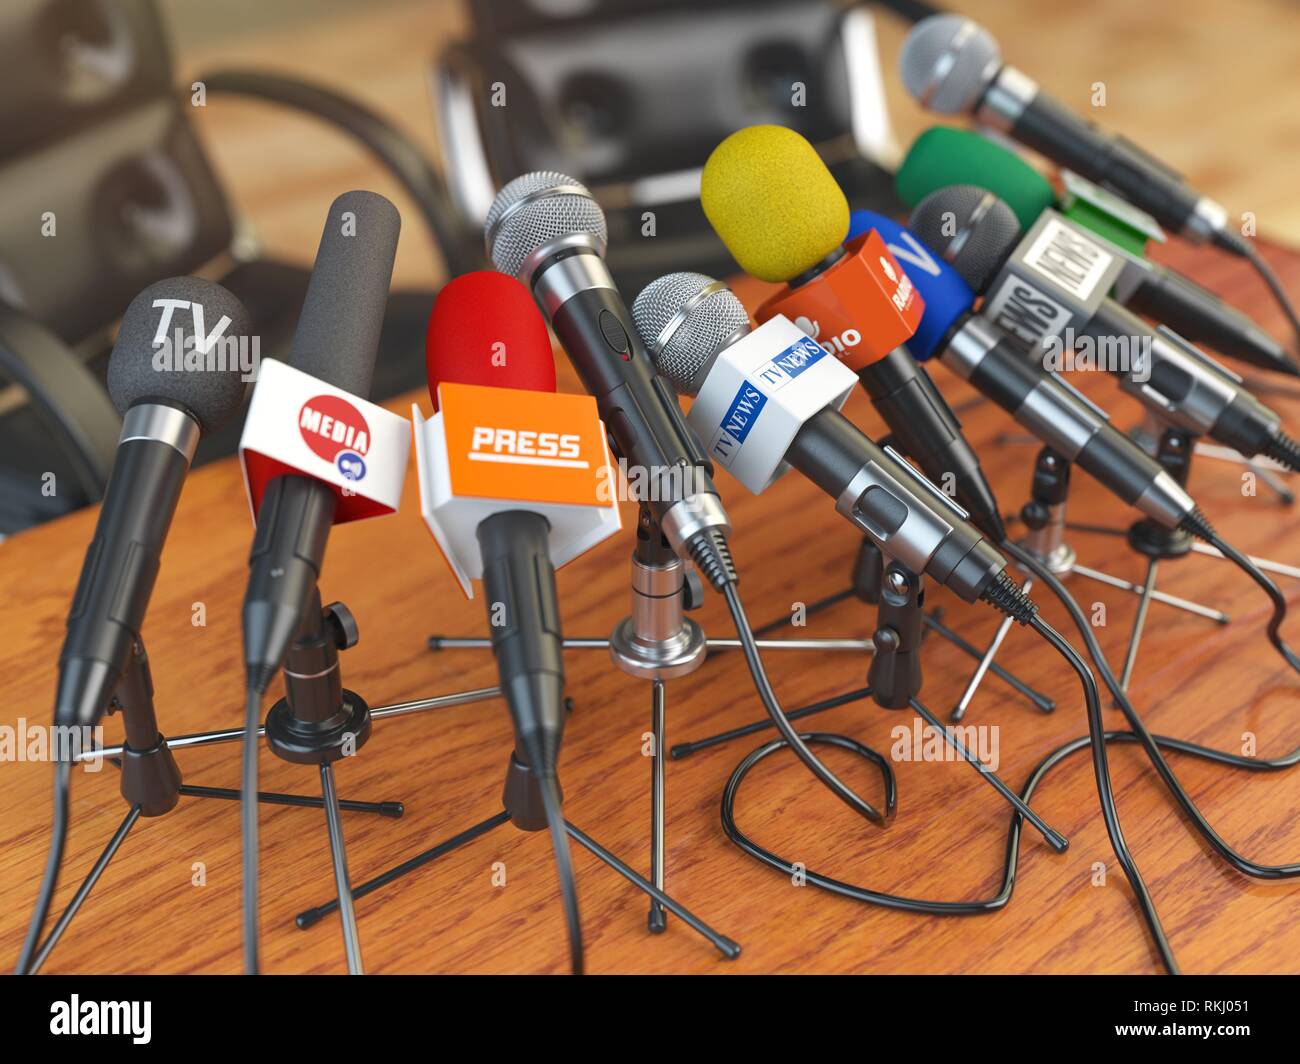 Press conference or interview concept. Microphones of different mass media, radio, tv and press prepared for conference meeting. 3d illustration. Stock Photo